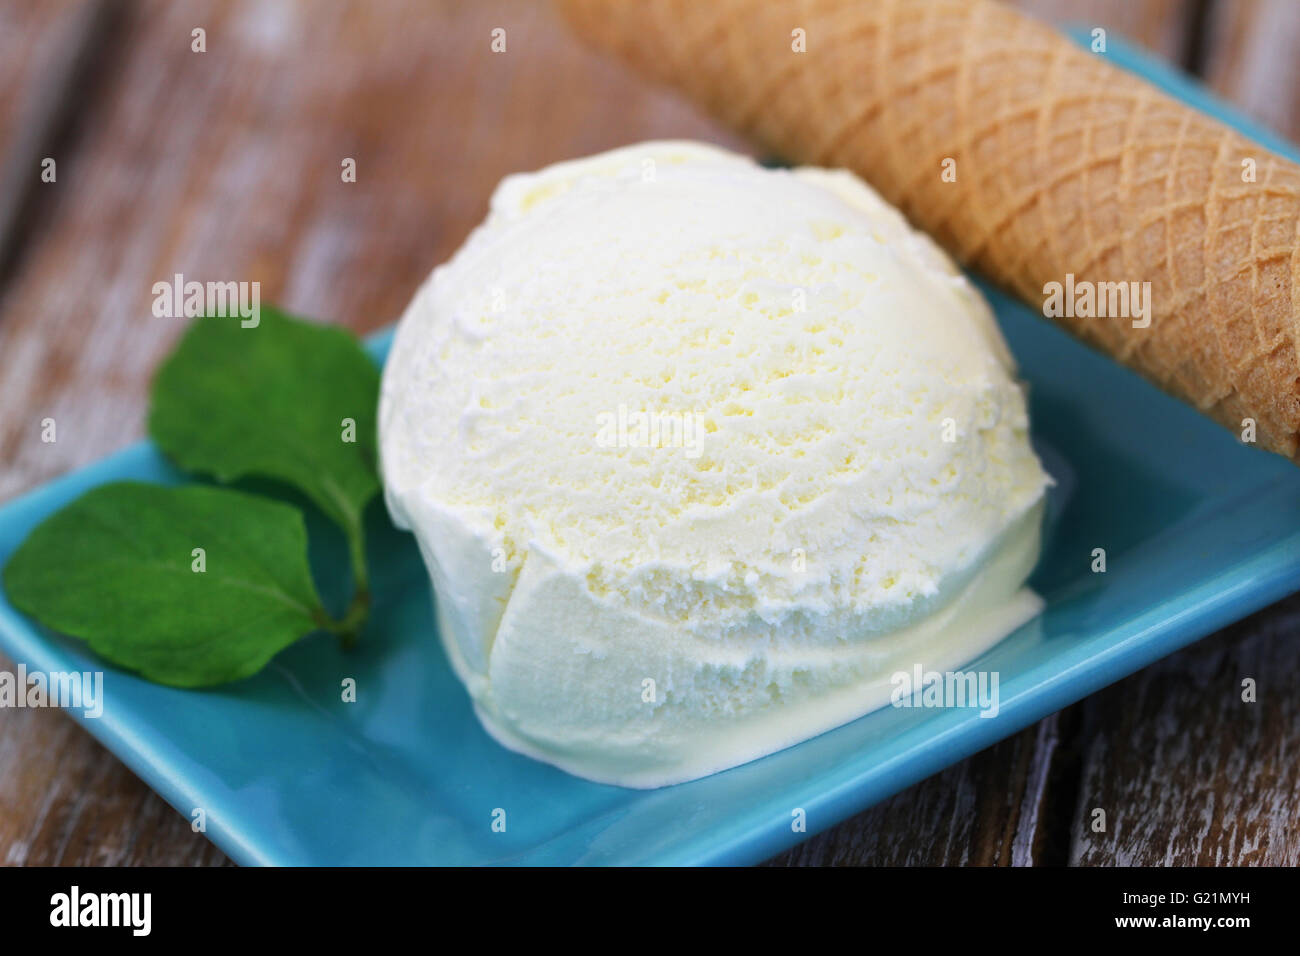 Scoop of vanilla ice cream and wafer on rustic wooden surface Stock Photo